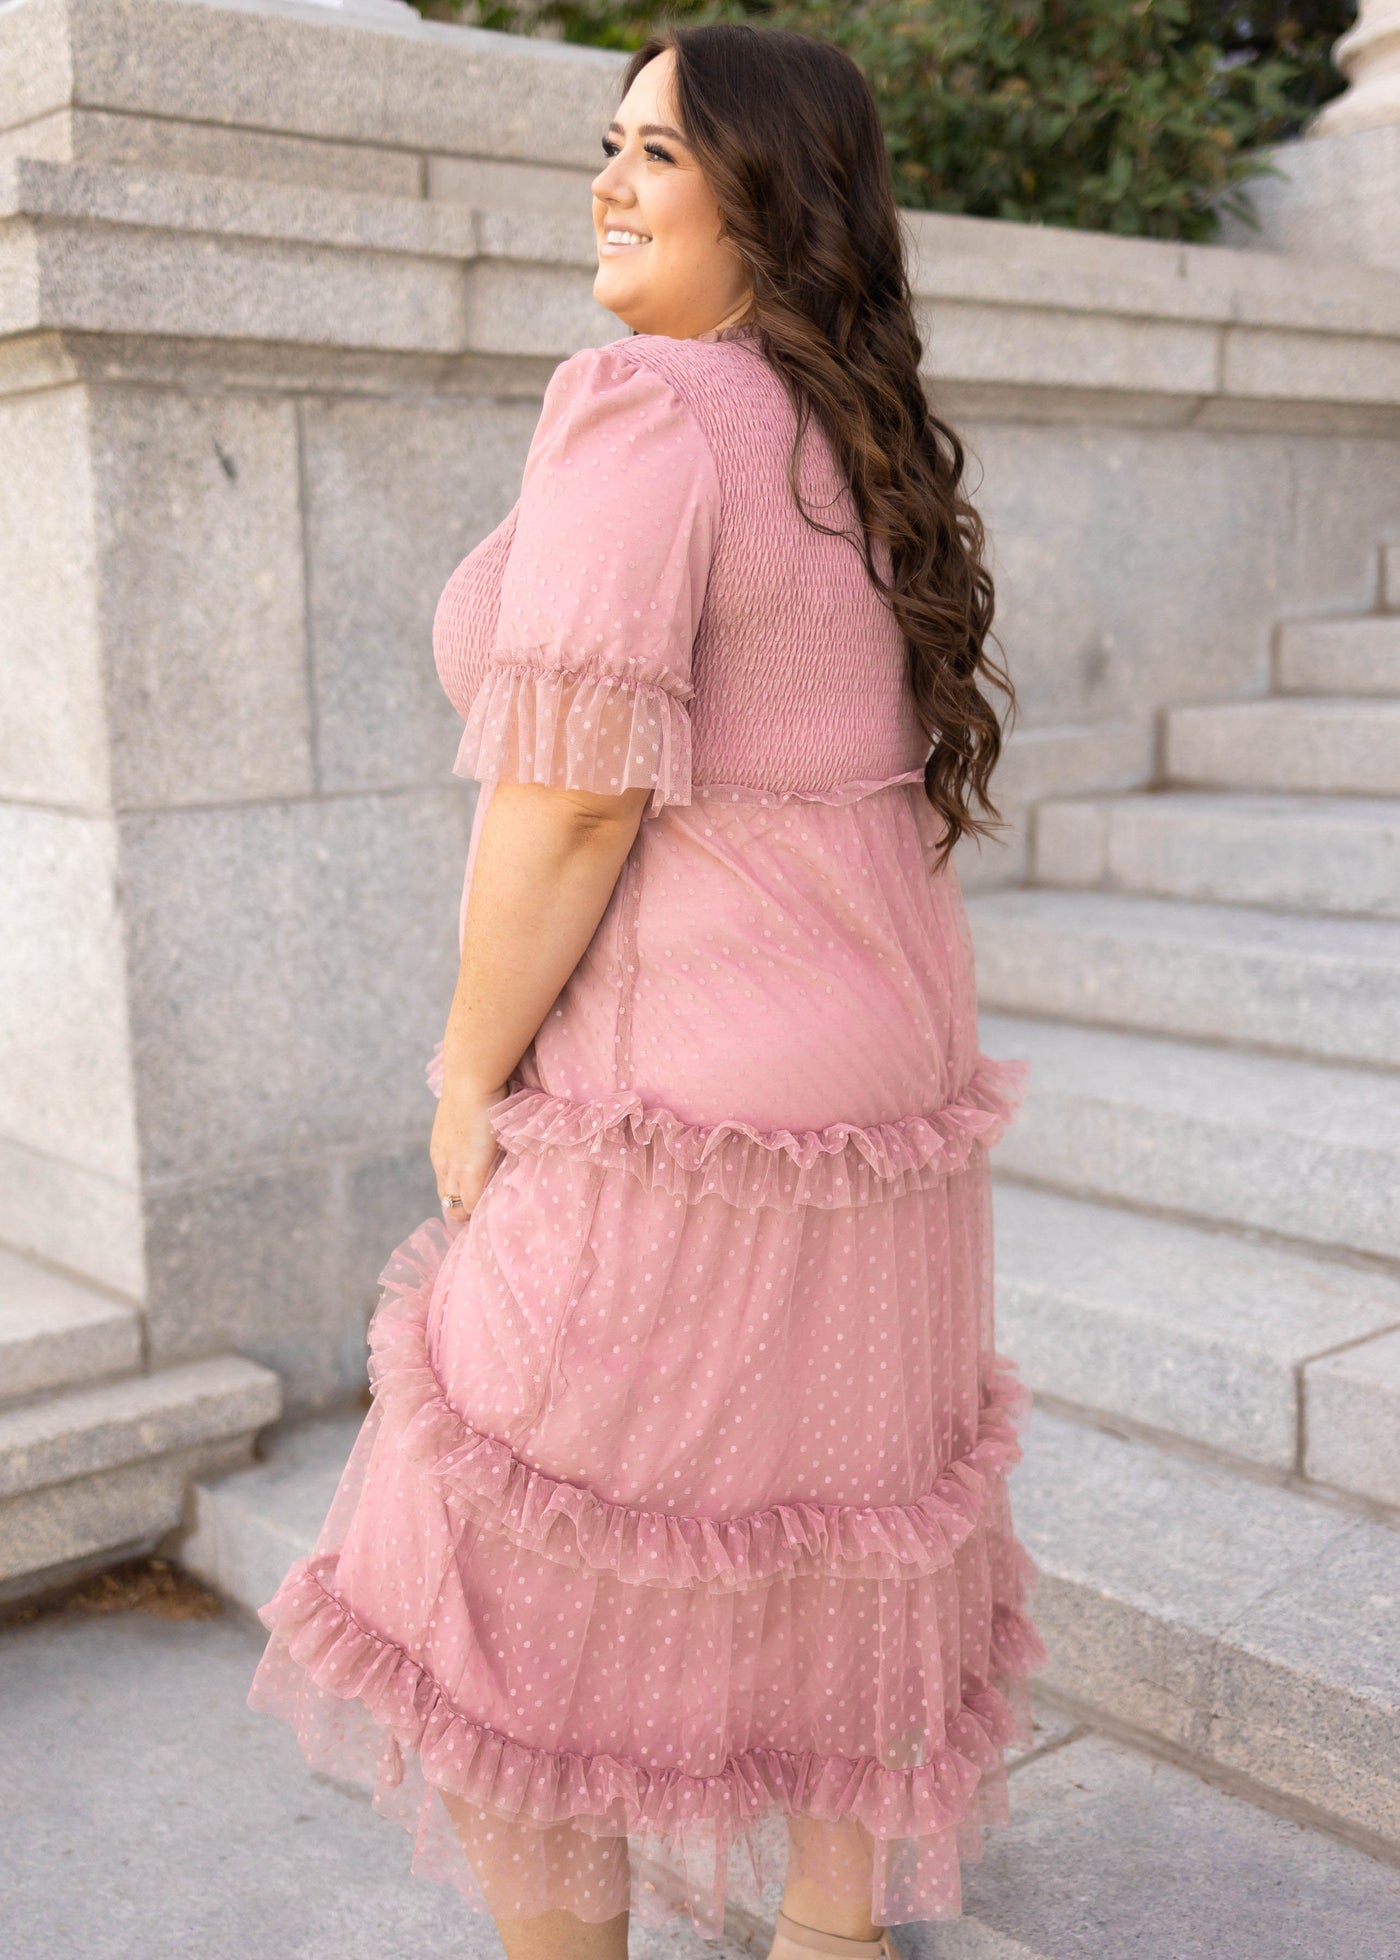 Side view of a dusty pink dress with short sleeves and ruffles on skirt